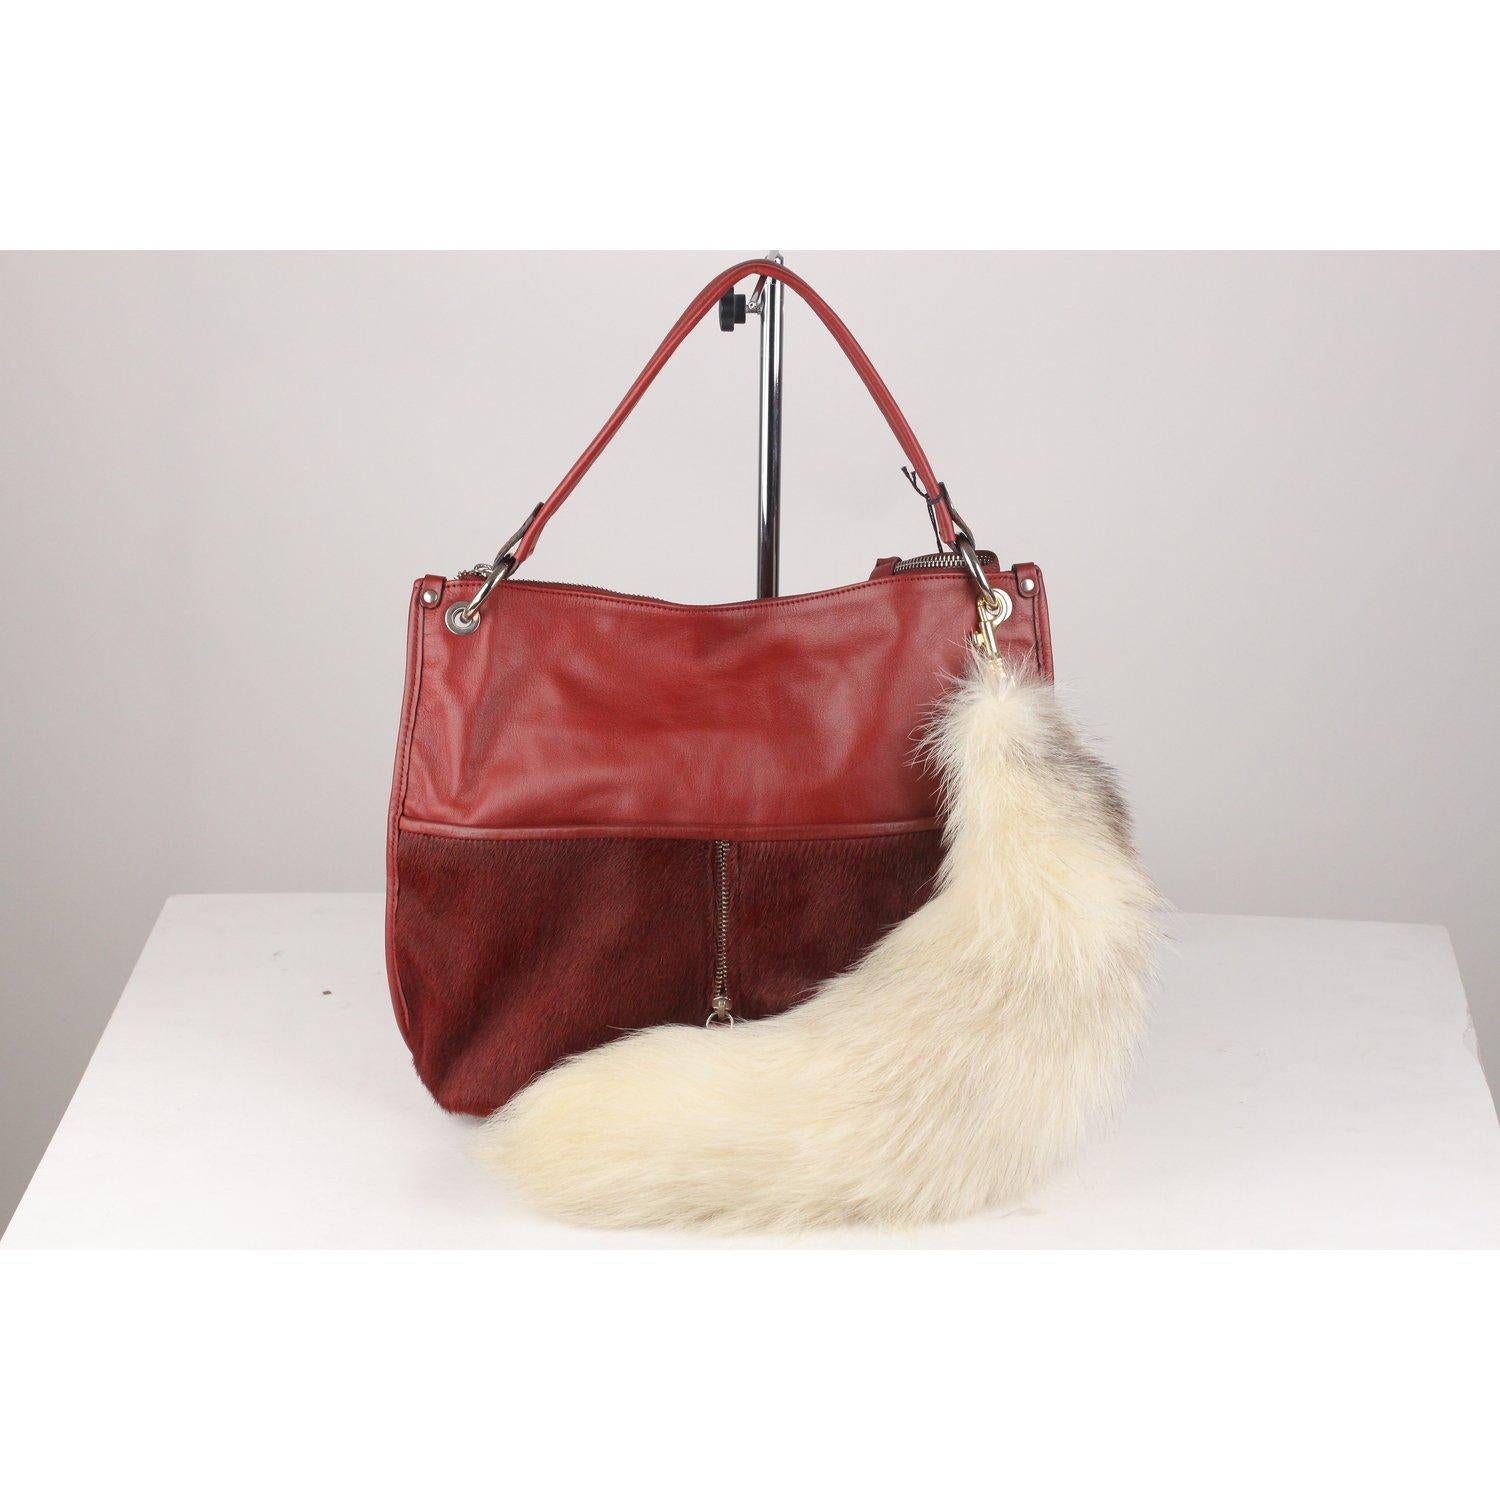 MATERIAL: Fur COLOR: Ivory COUNTRY OF MANUFACTURE: Italy Condition CONDITION DETAILS: A :EXCELLENT CONDITION - Used once or twice. Looks mint. Imperceptible signs of wear - The bag is not for sale, is for demonstration purposes only. - Internal Ref: